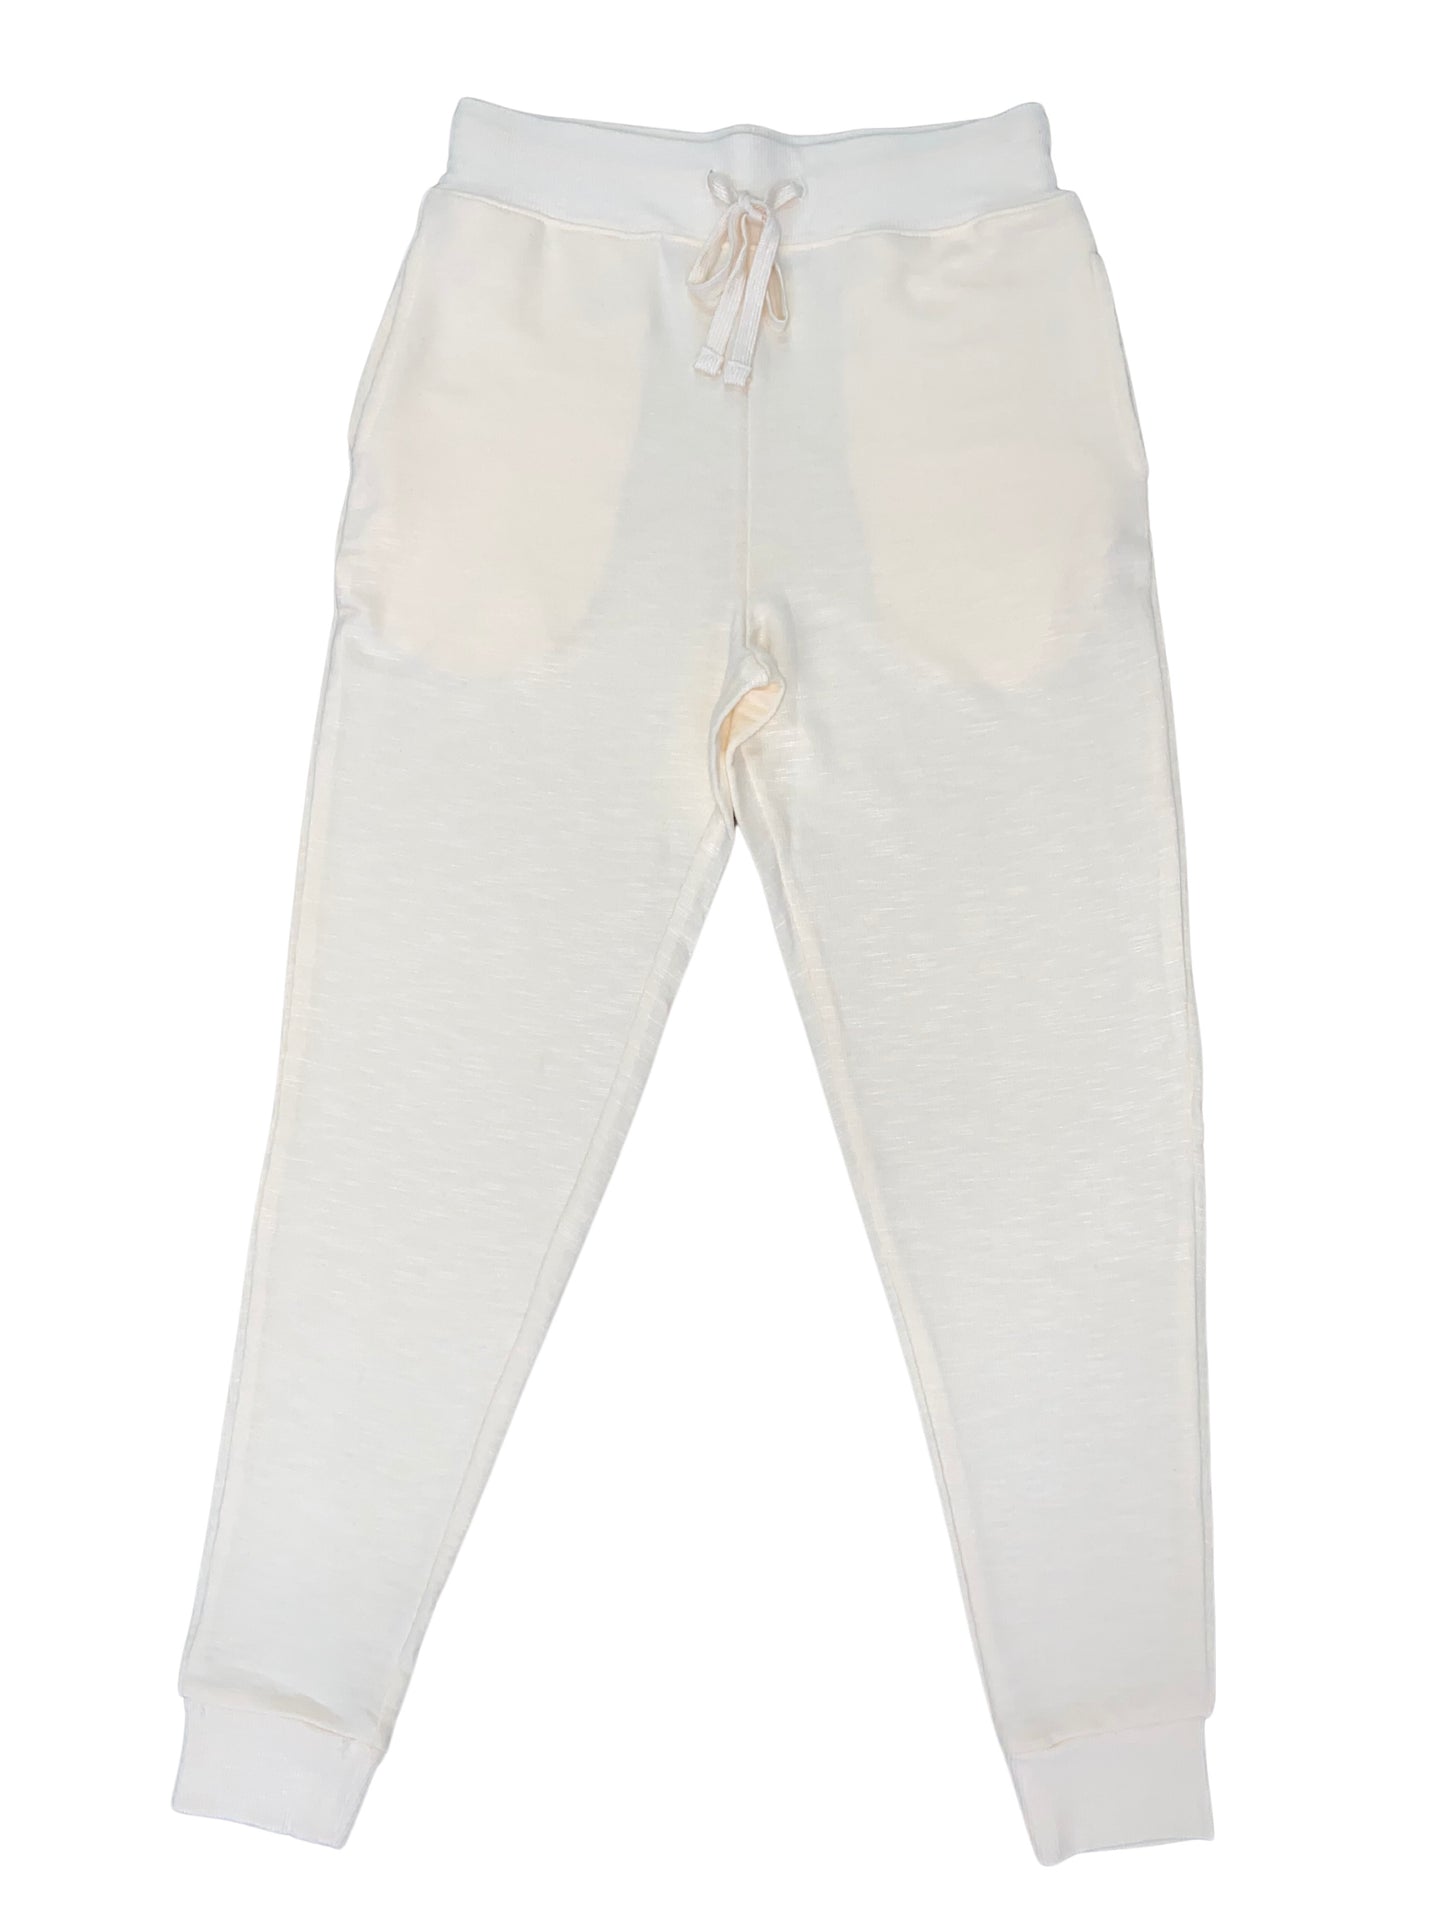 women's lounge French Terry cream jogger pants - 8586